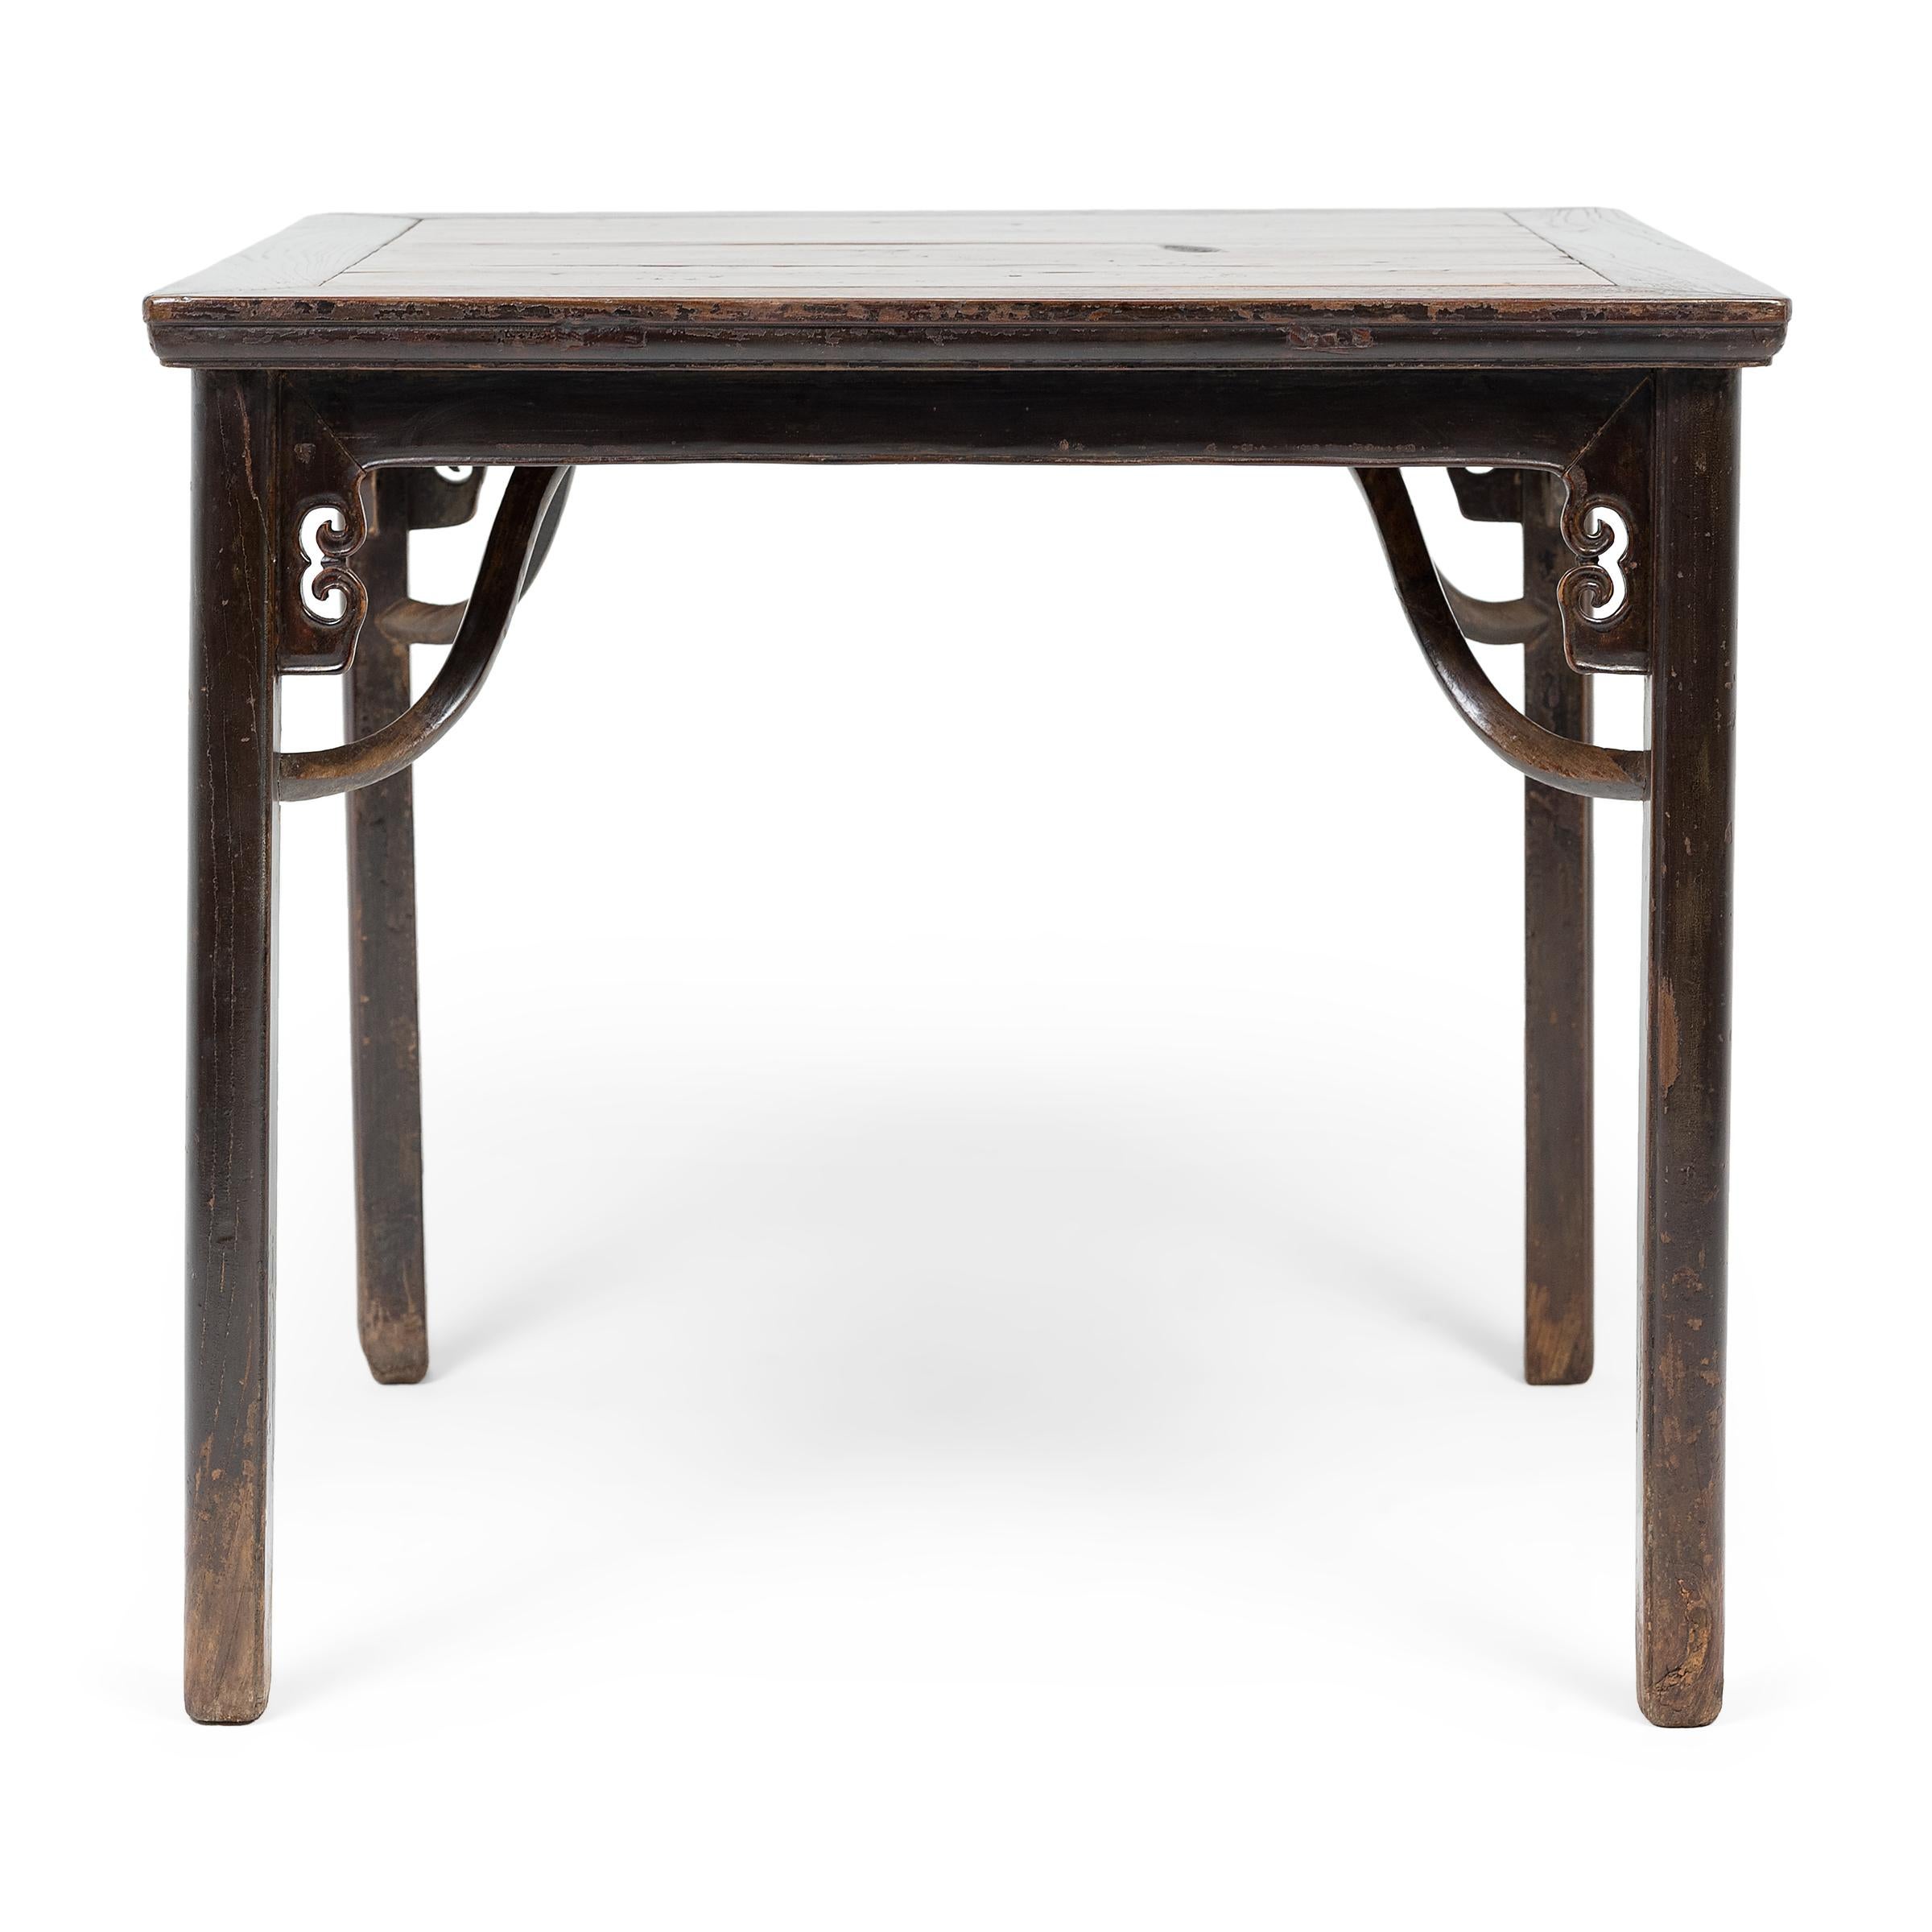 This early 19th century square table from northern China expresses Ming-dynasty tastes with clean lines and a simple silhouette. The table stands on four straight legs stabilized by giant’s arm braces and topped with scrolled spandrels carved in the